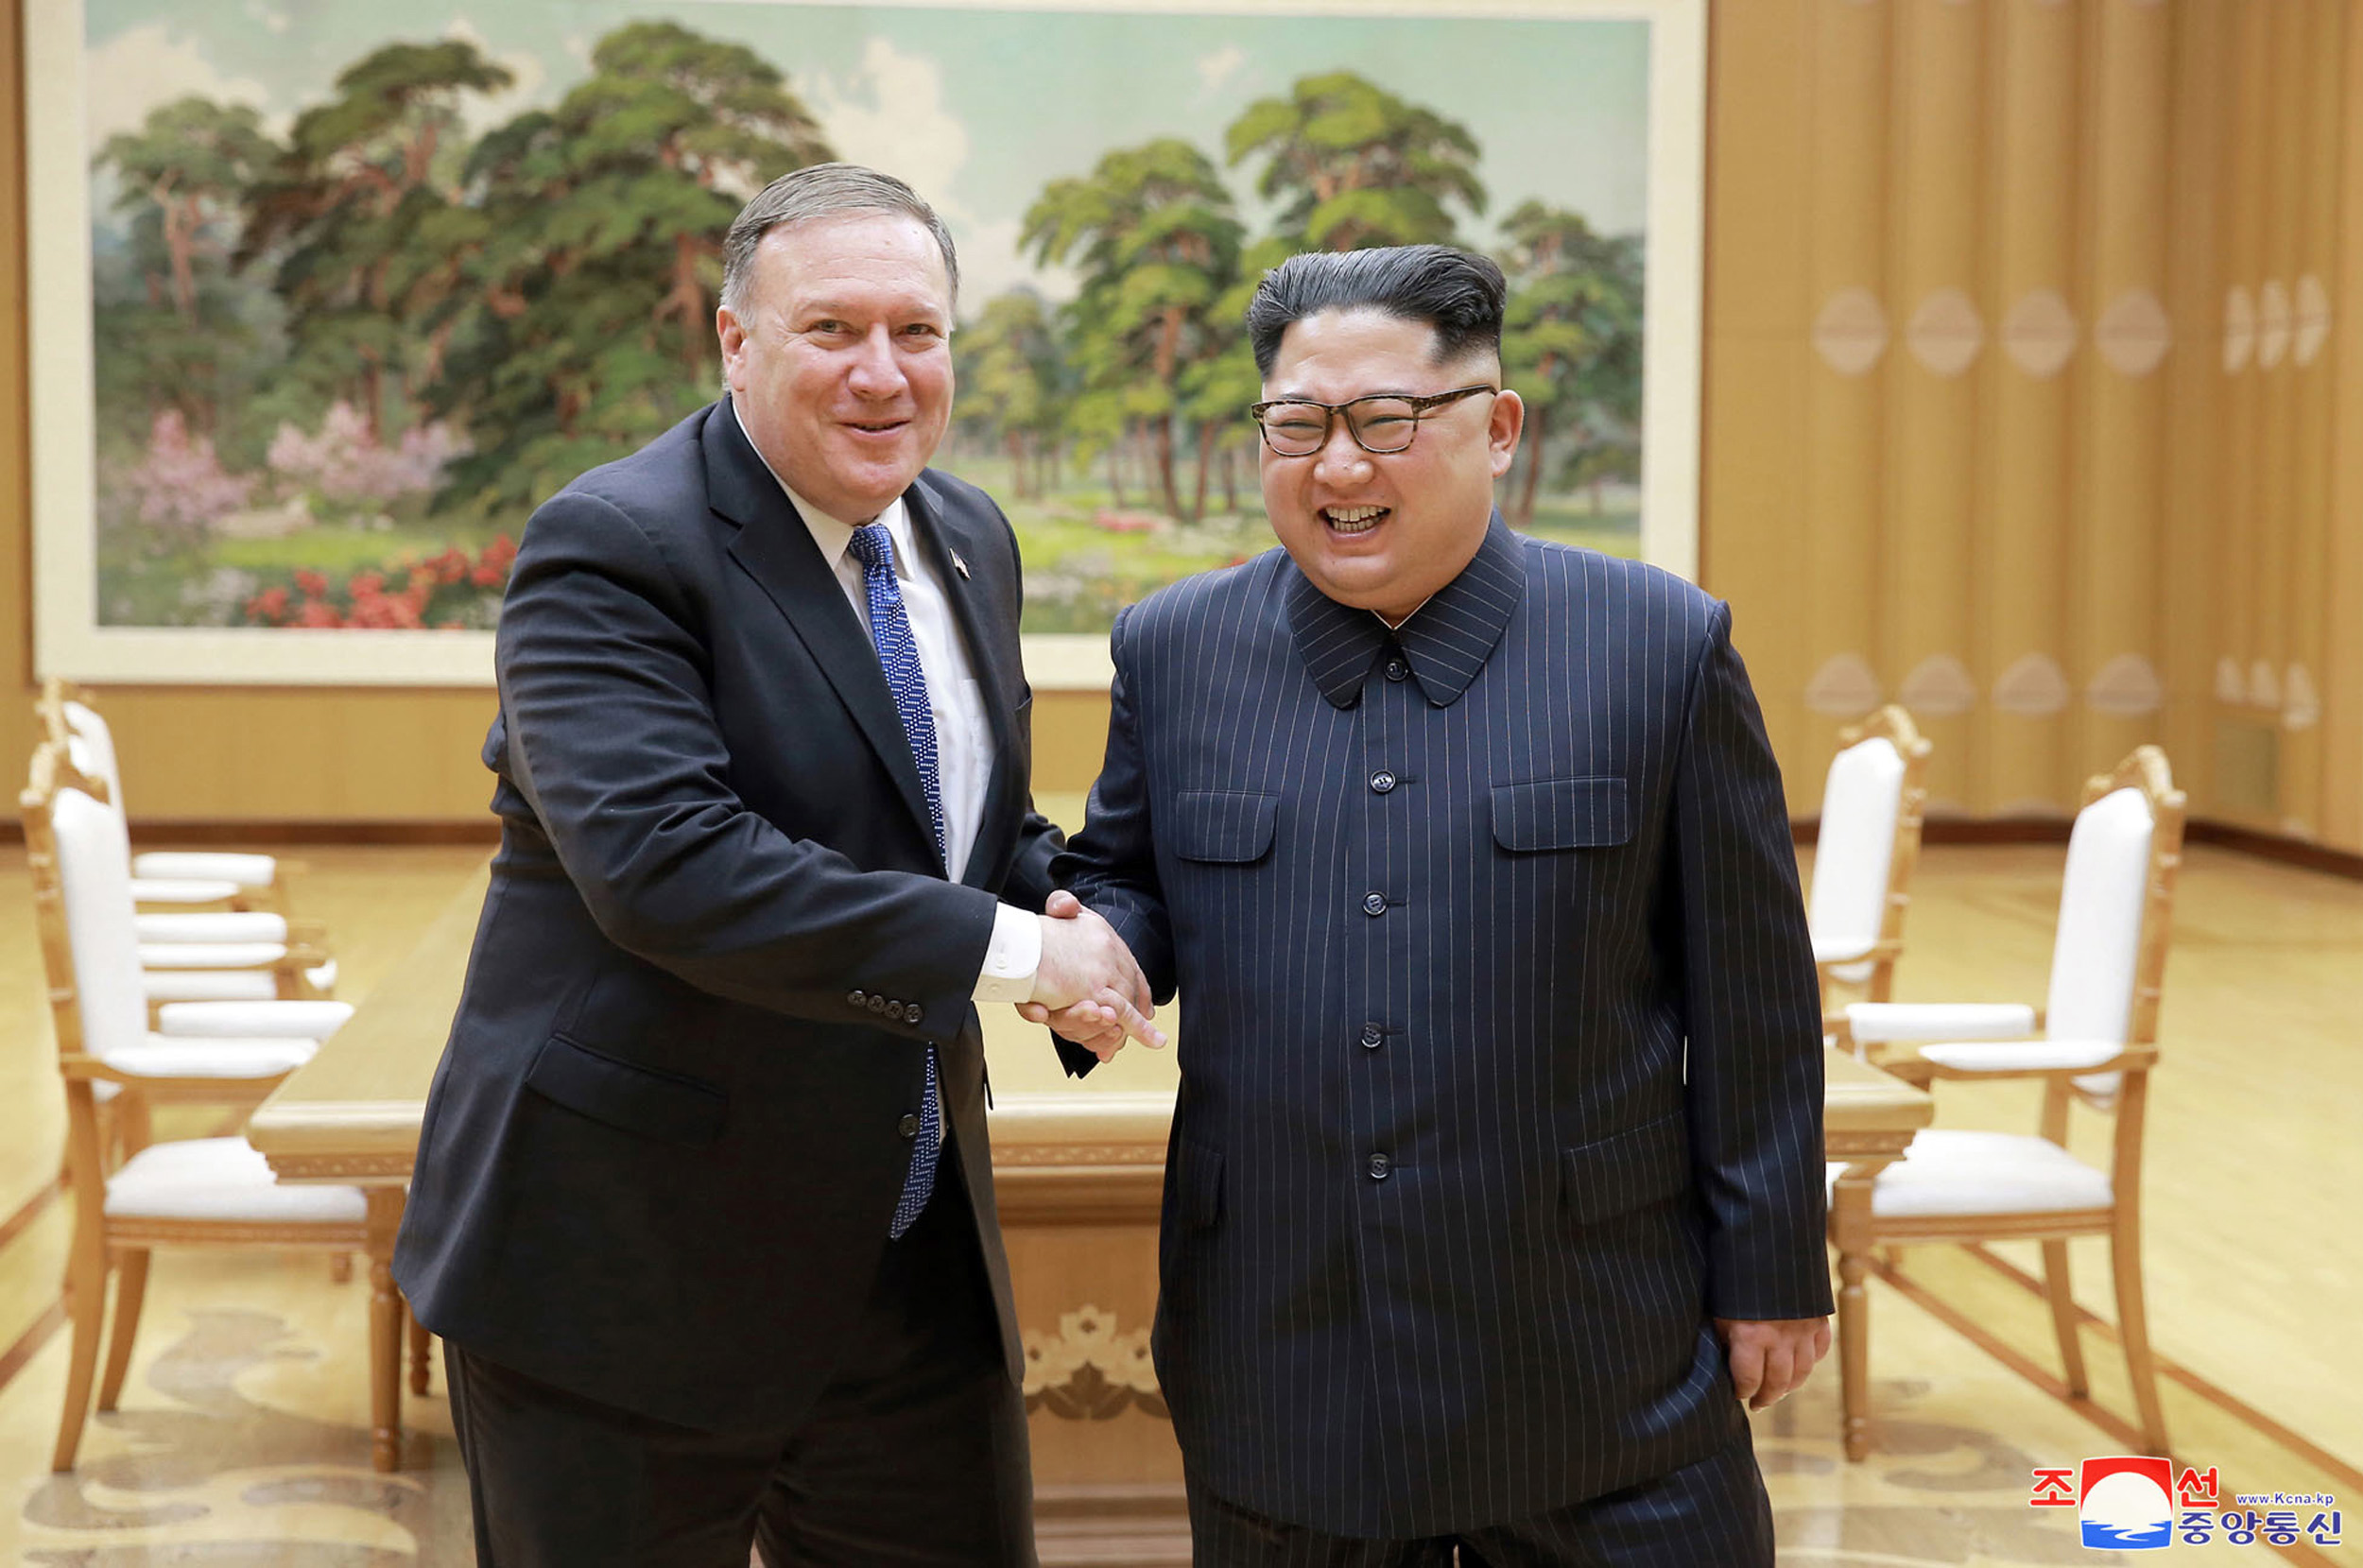 PHOTO: Secretary of State Mike Pompeo, left, shakes hands with North Korean leader Kim Jong Un during a meeting at Workers' Party of Korea headquarters in Pyongyang, North Korea.